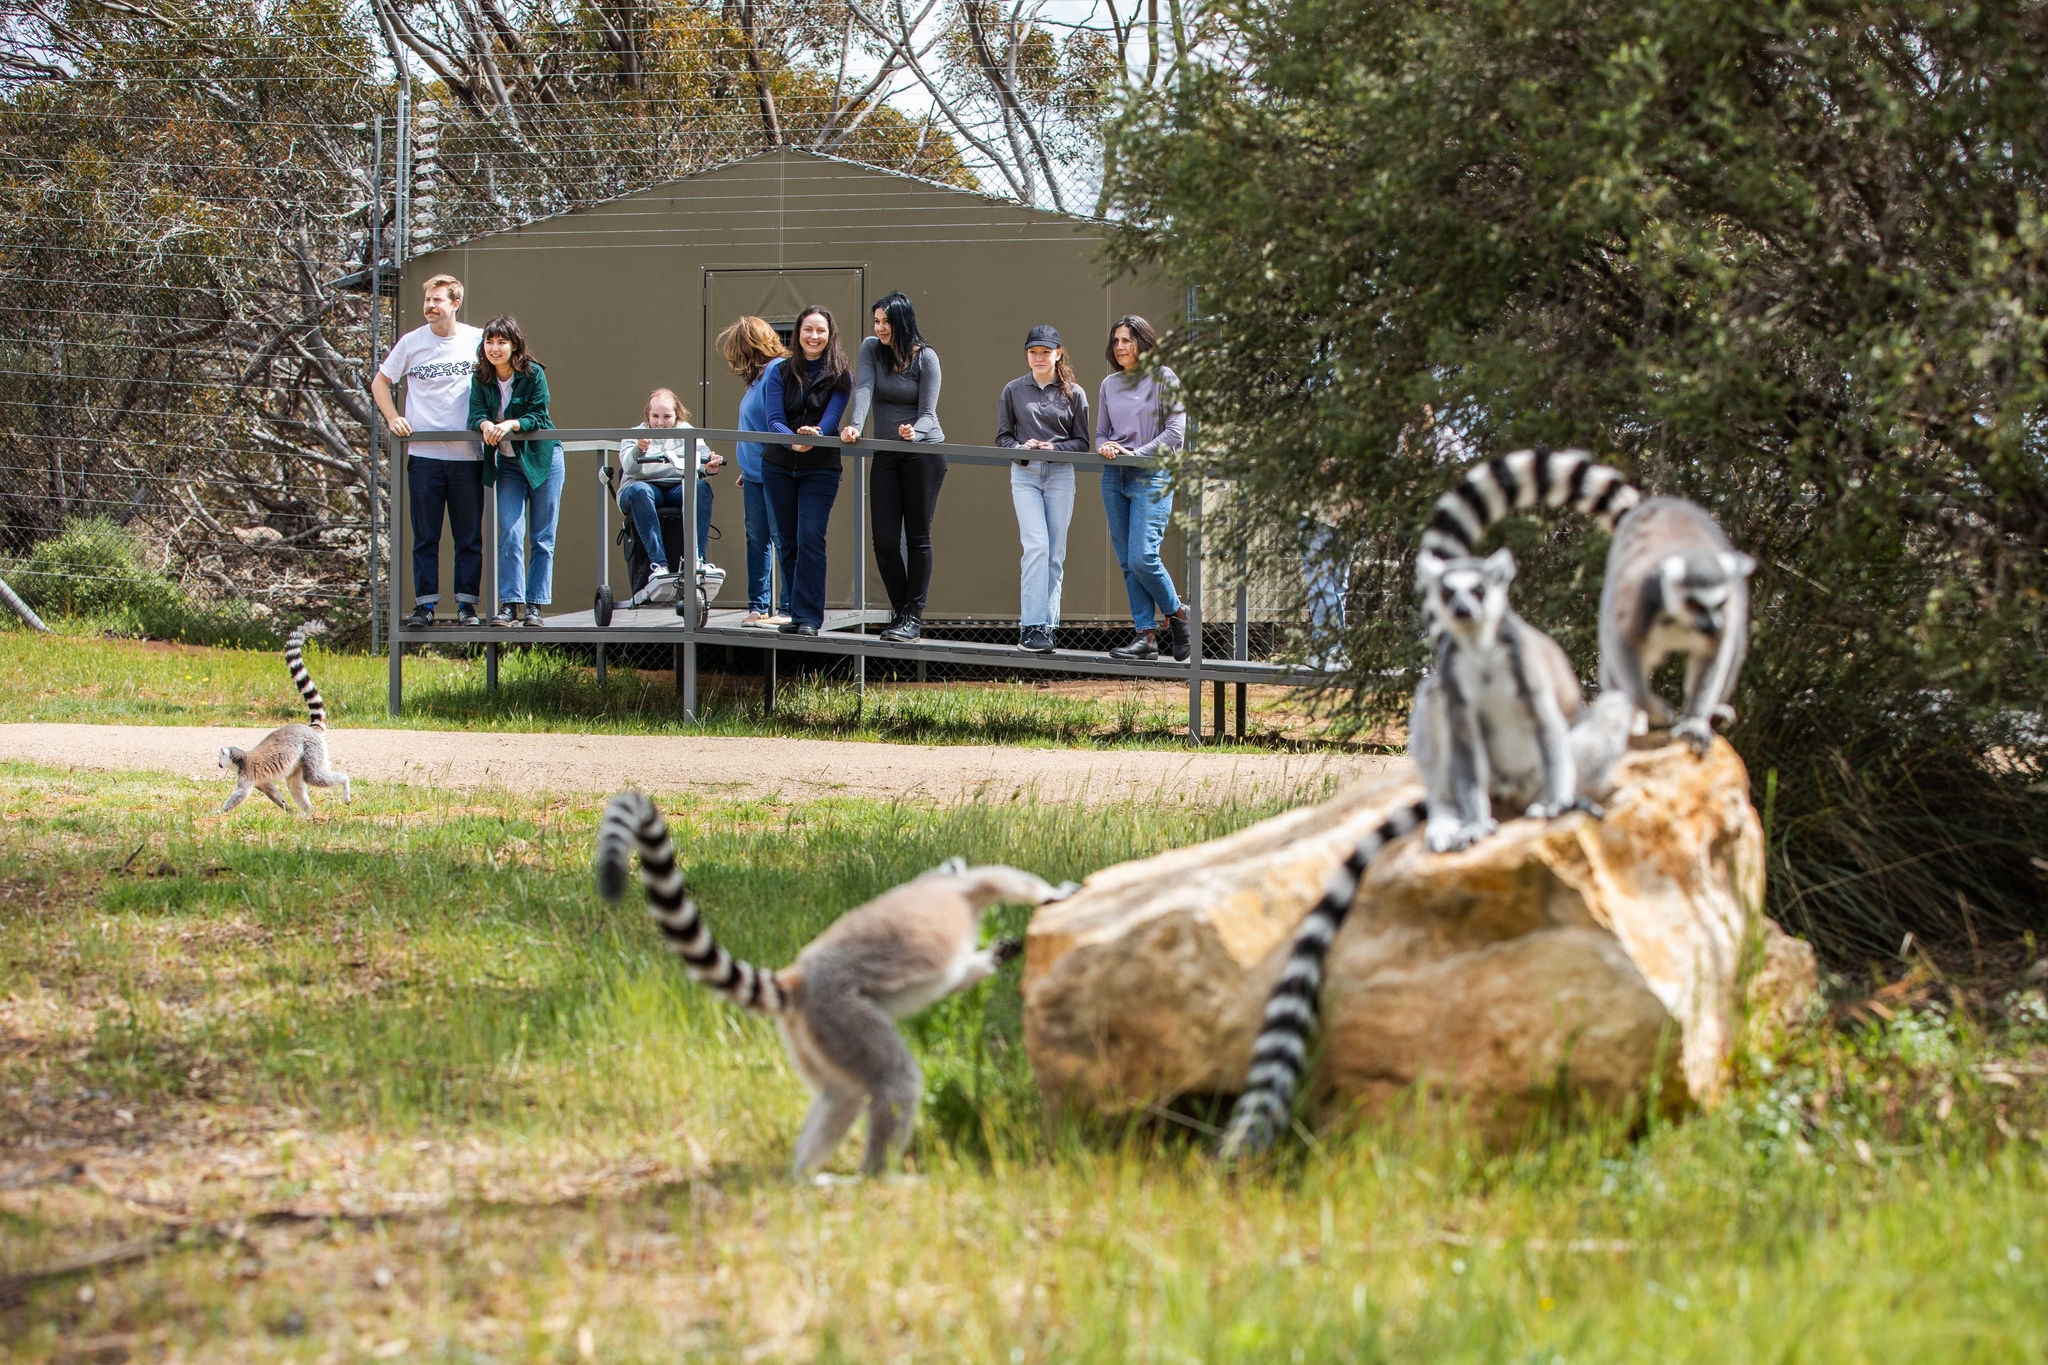 A group of people, including a person in a wheelchair, on a ramp watching lemurs.